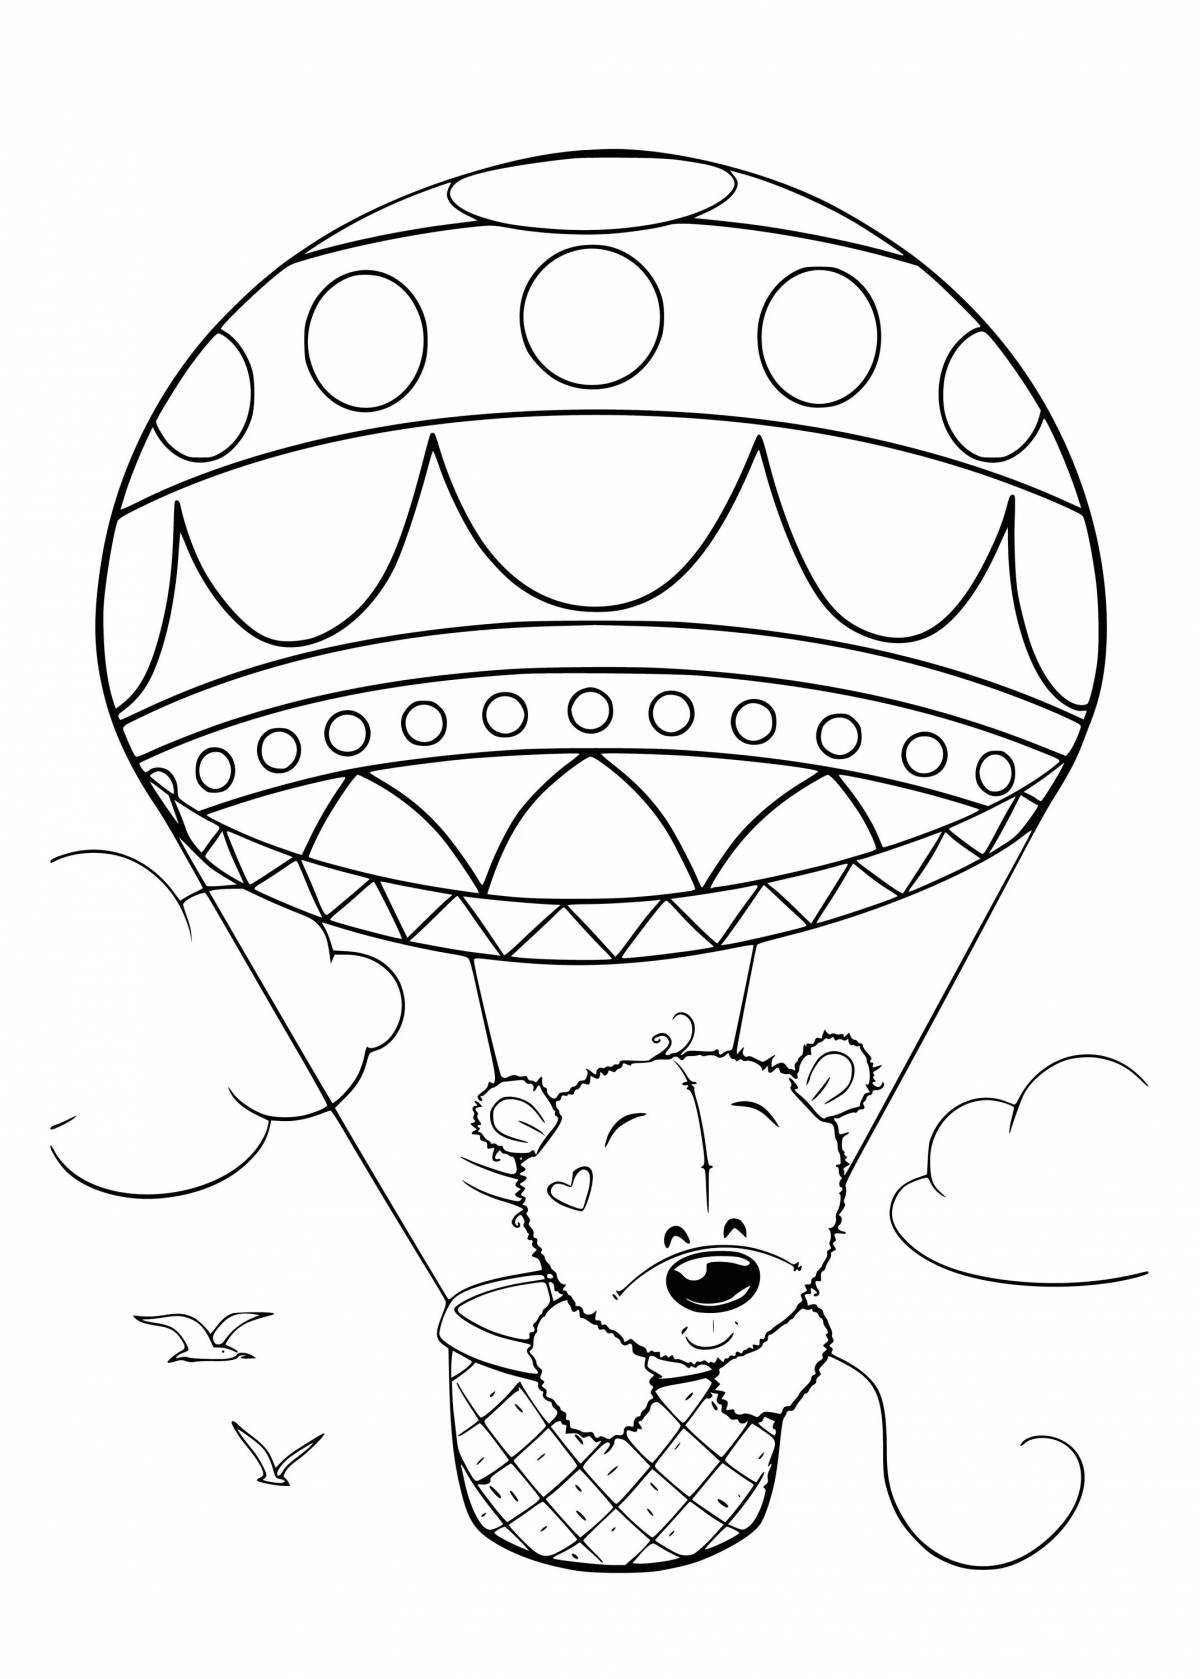 Bubble bear with balloons